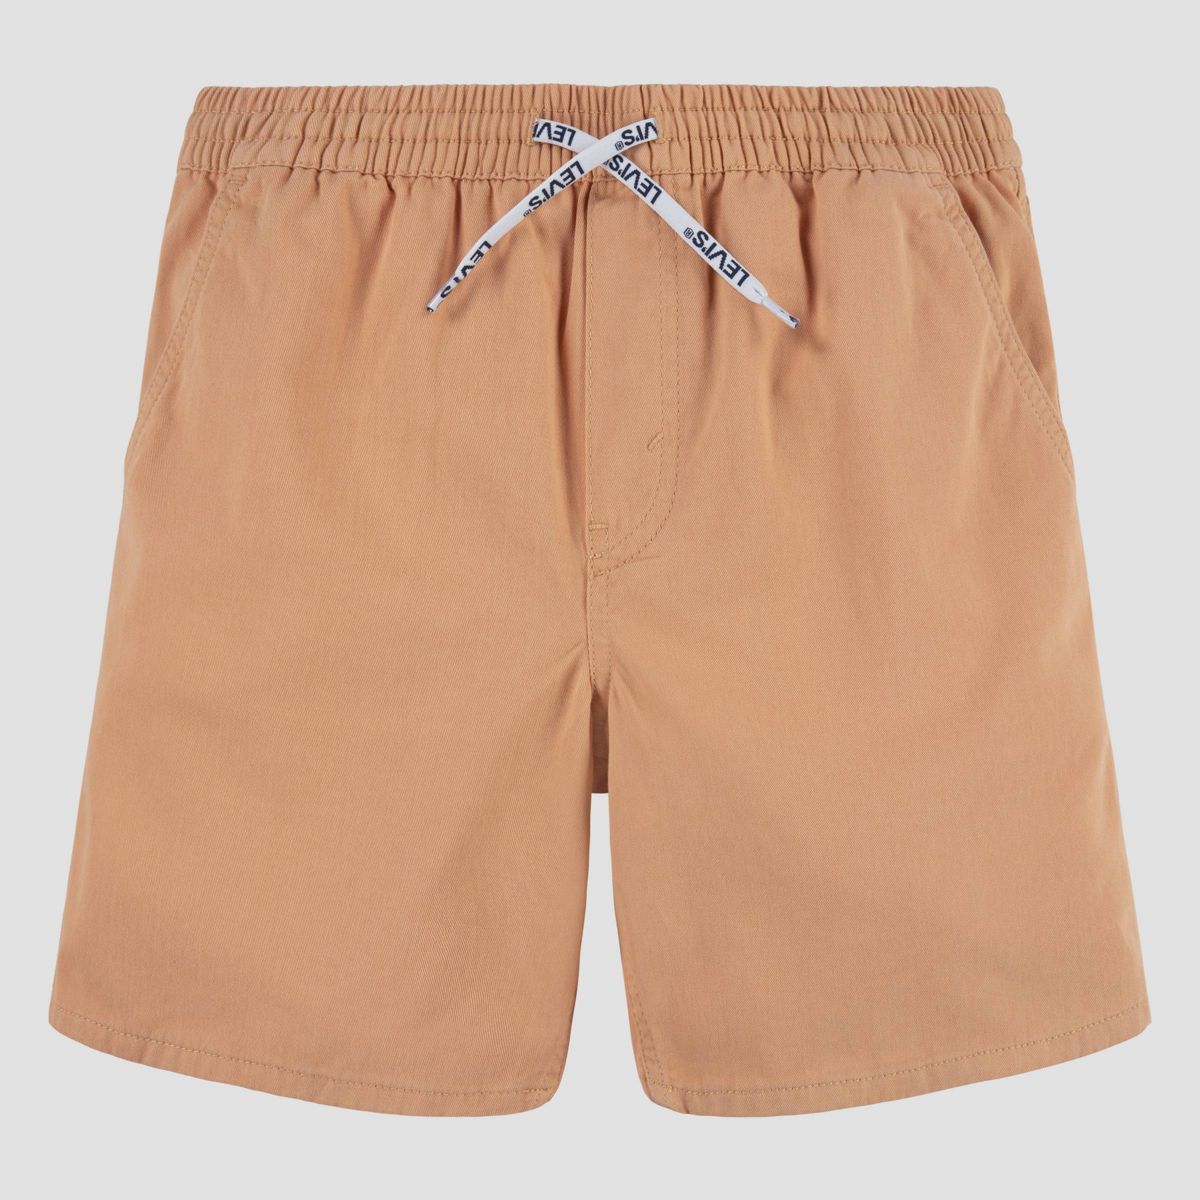 Levi's® Boys' Woven Pull-On Shorts | Target